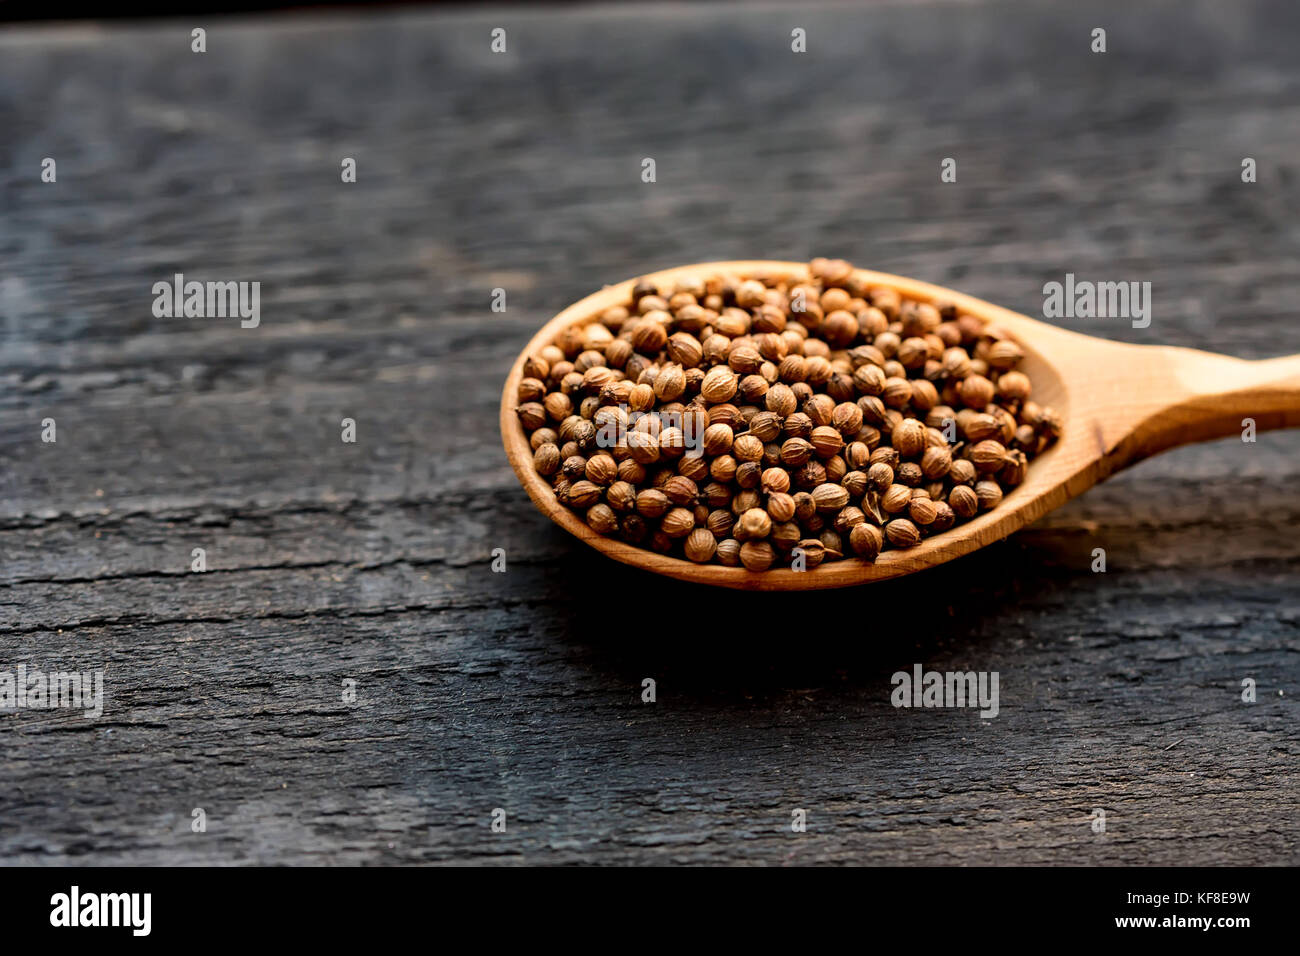 Coriander seeds in wooden spoon on wooden table Stock Photo